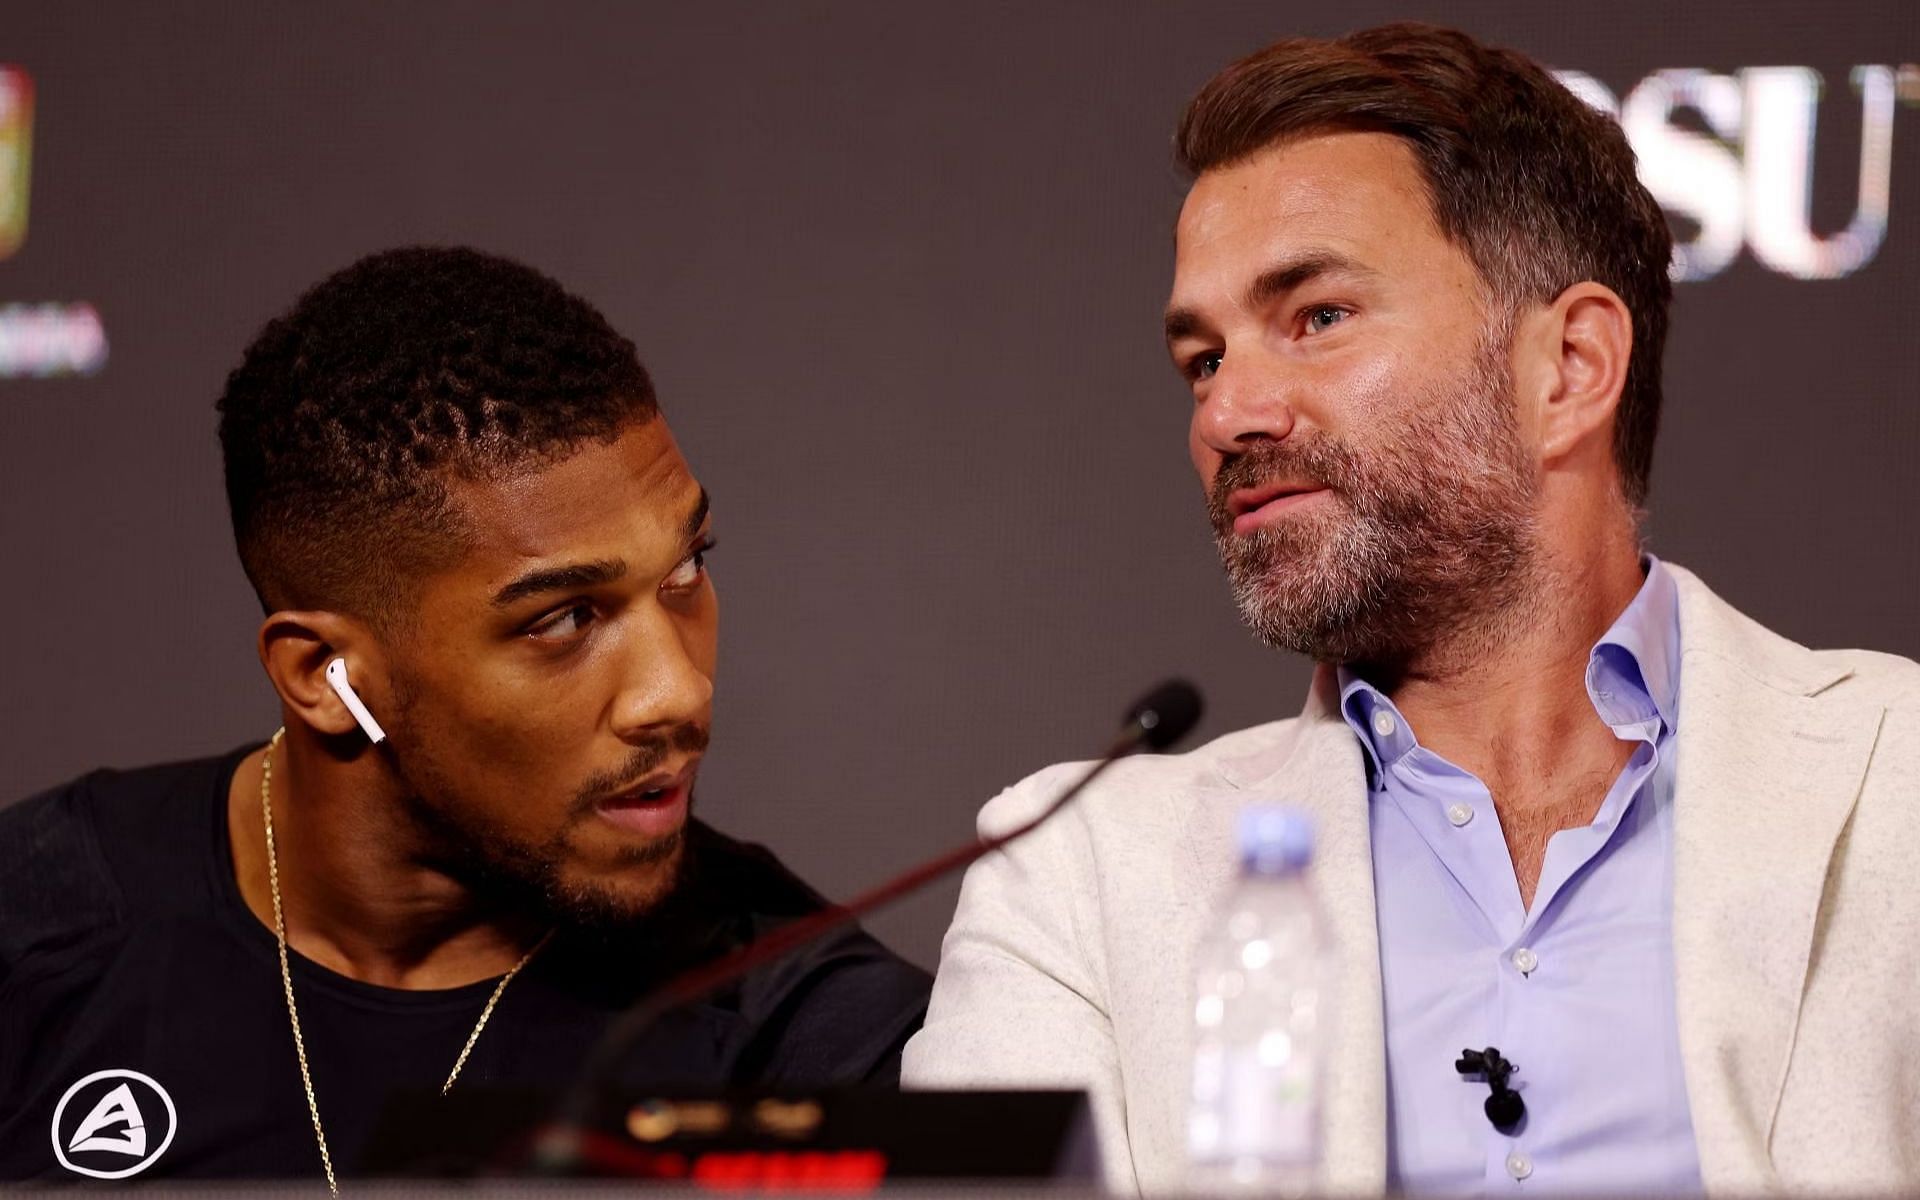 Eddie Hearn (right) shares thoughts on Anthony Joshua (left) wanting to retire in 2026 [Image Courtesy: @GettyImages]